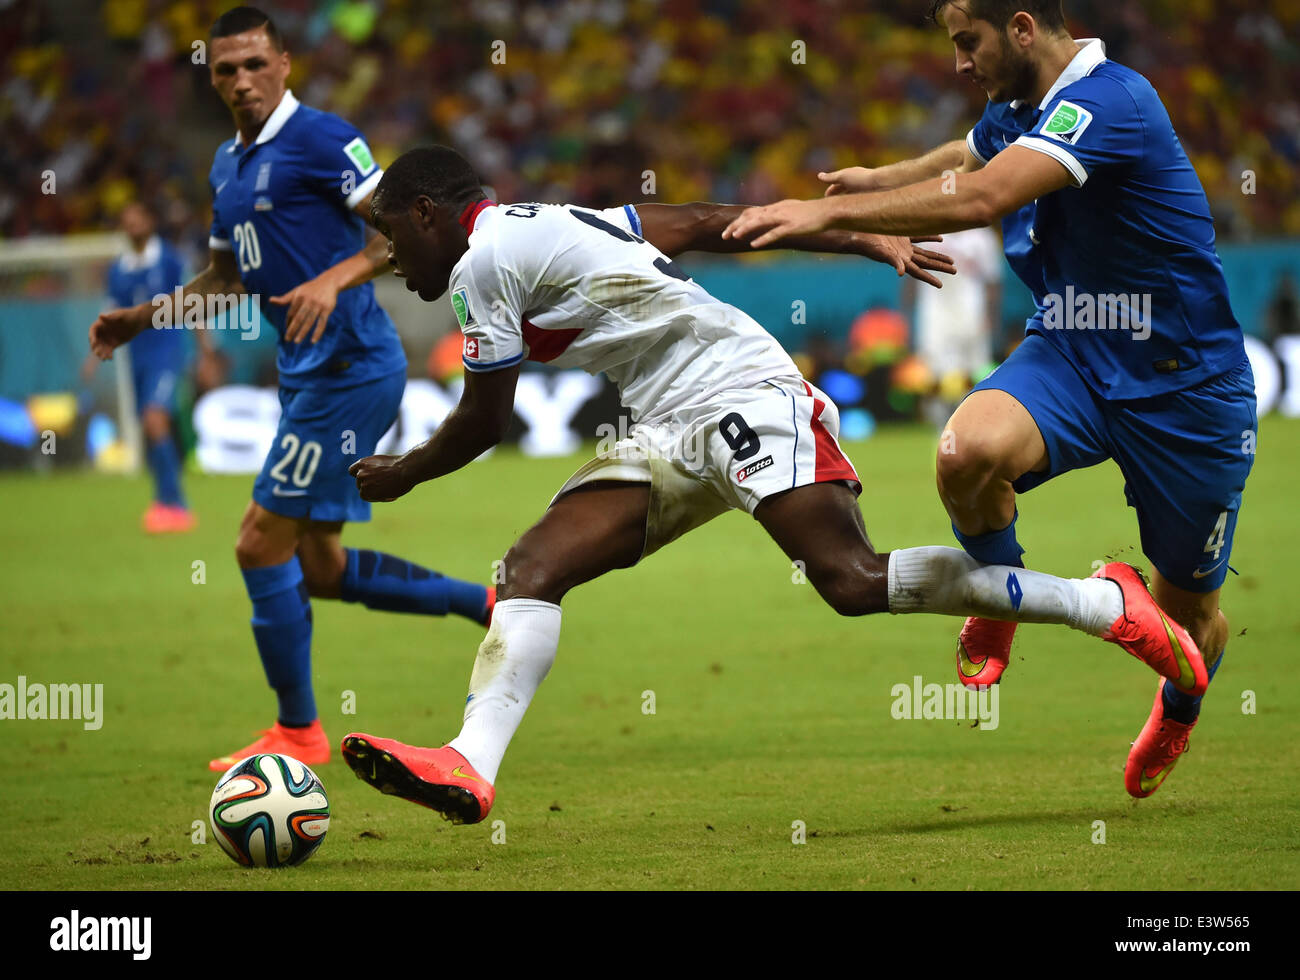 Recife, Brazil. 29th June, 2014. Costa Rica's Joel Campbell (C) controls the ball during a Round of 16 match between Costa Rica and Greece of 2014 FIFA World Cup at the Arena Pernambuco Stadium in Recife, Brazil, on June 29, 2014. Credit:  Guo Yong/Xinhua/Alamy Live News Stock Photo